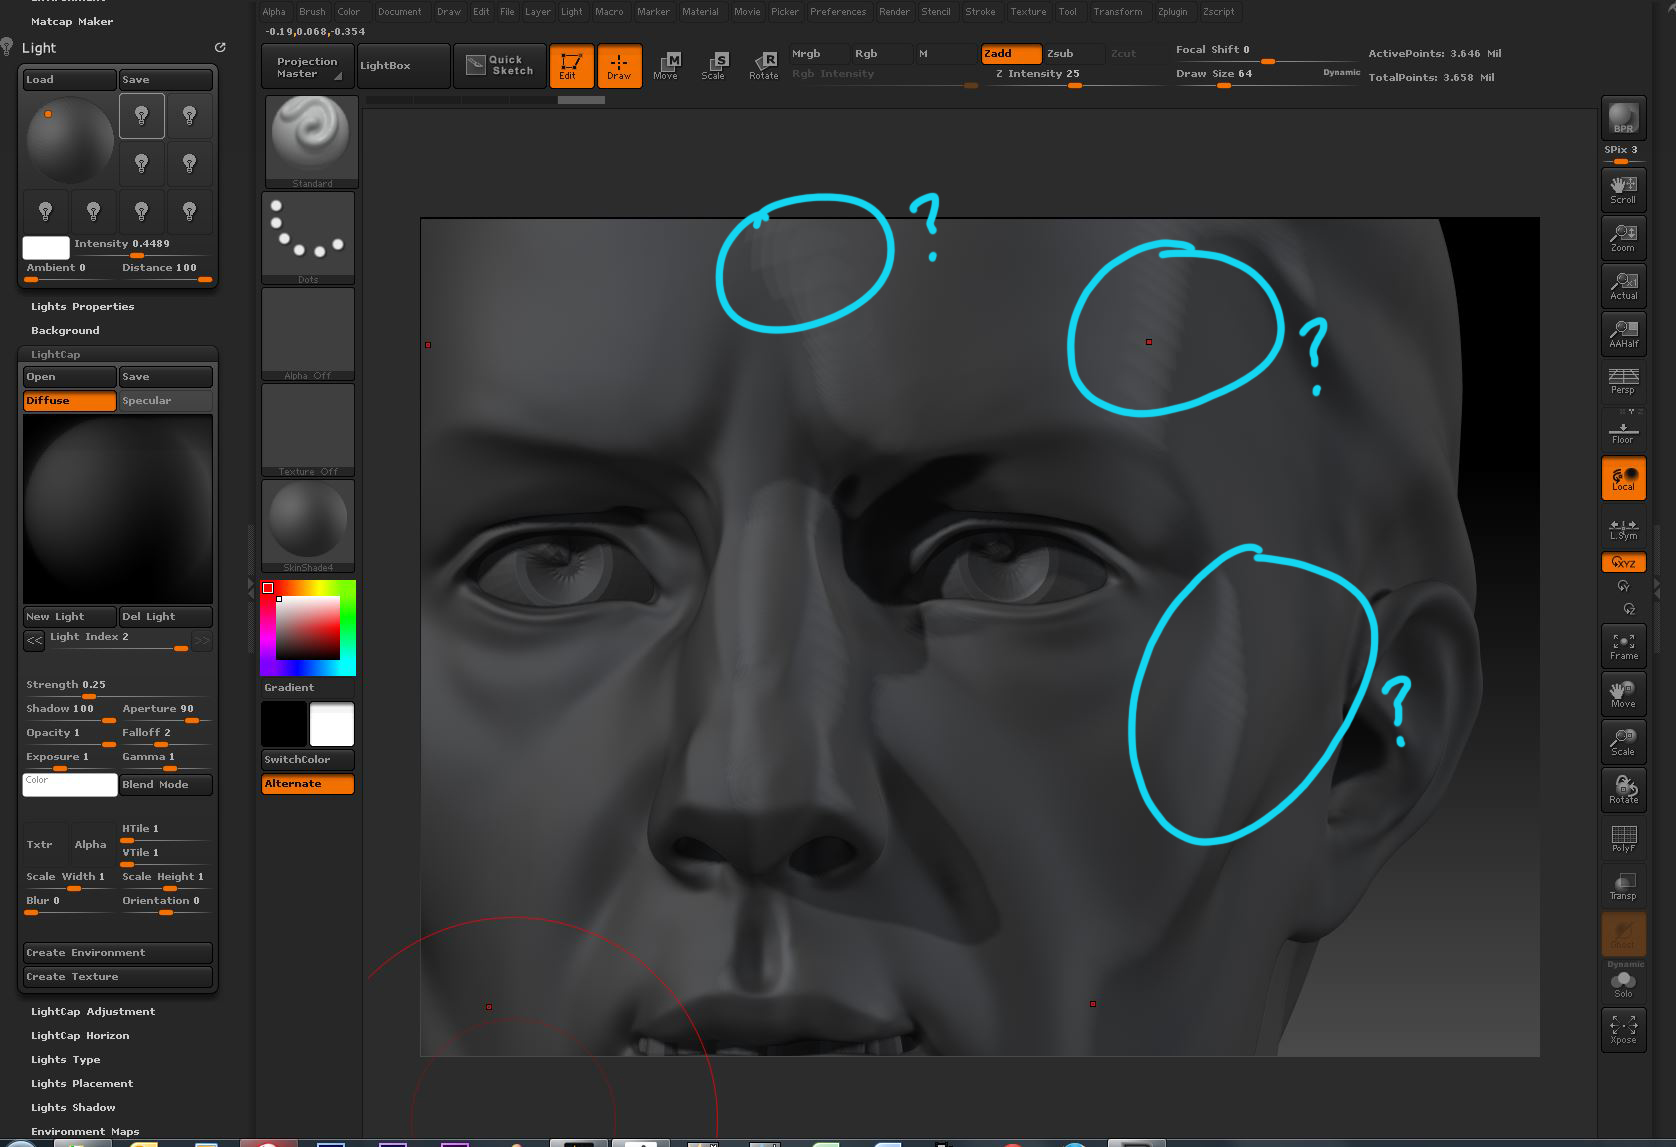 zbrush activate ao for bpr